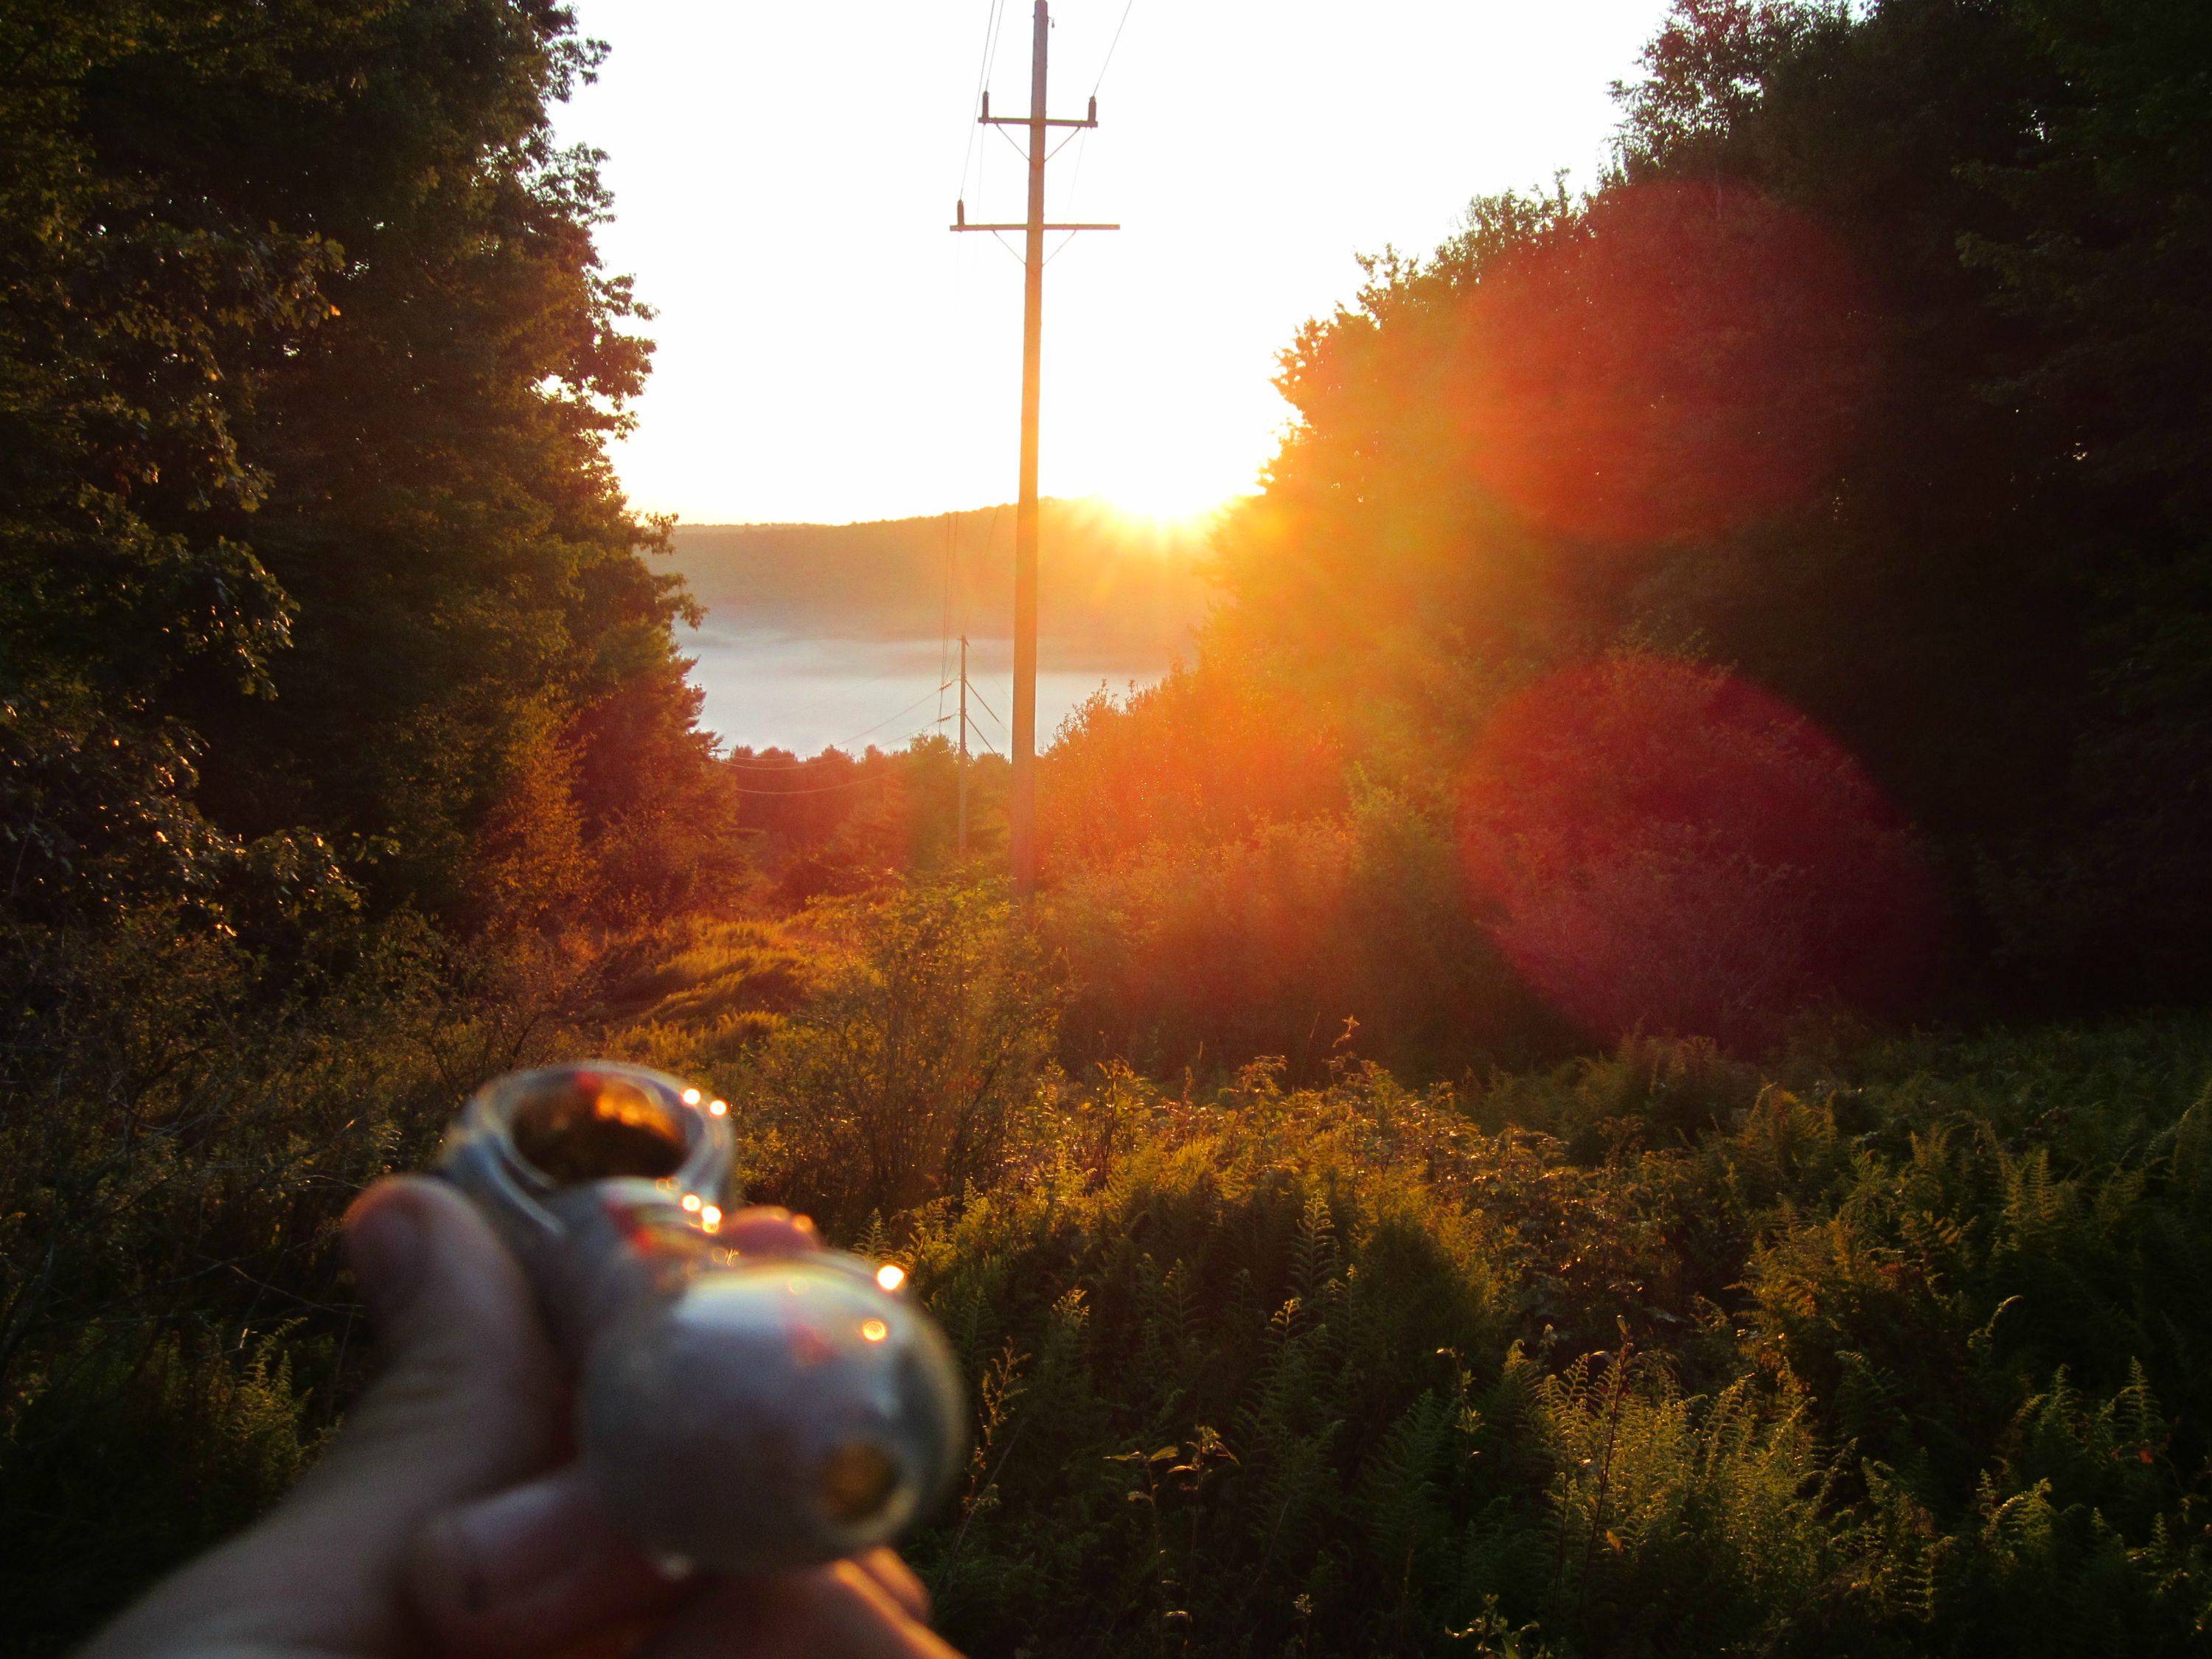 Sunrise session in upstate New York pikdit